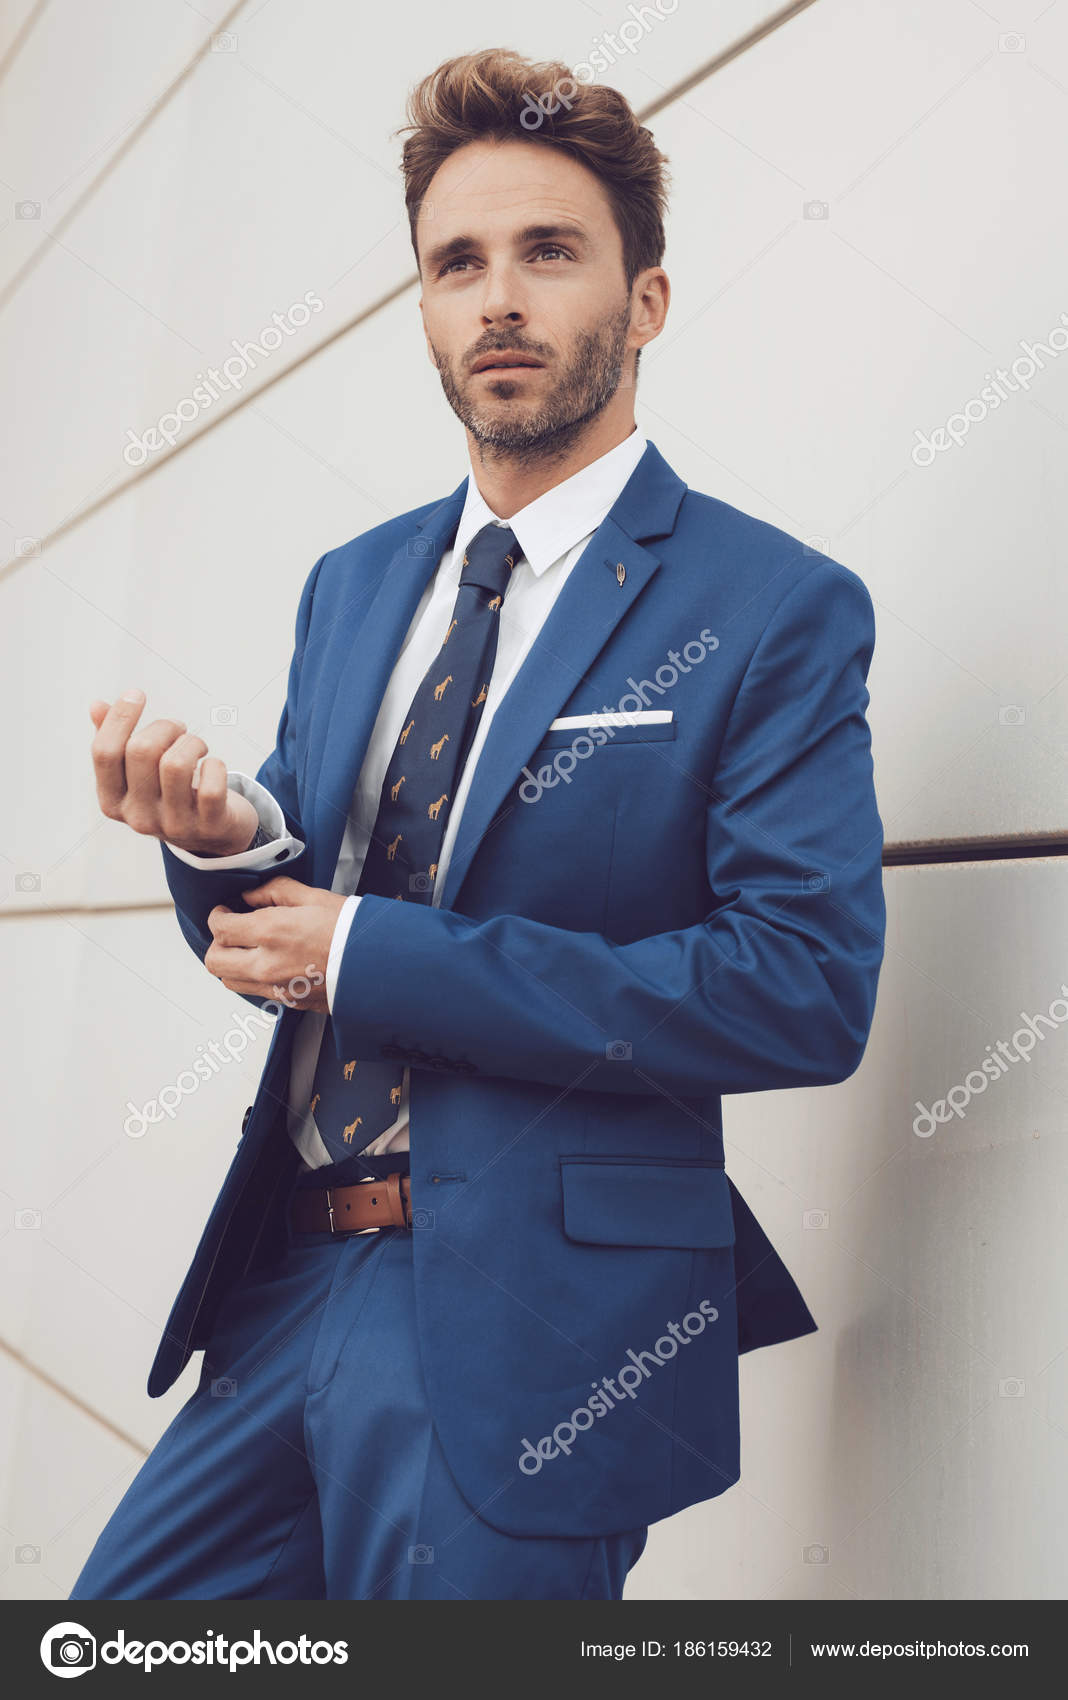 Premium Photo | A man with a beard in a blue suit poses on the street to  advertise men's clothing.